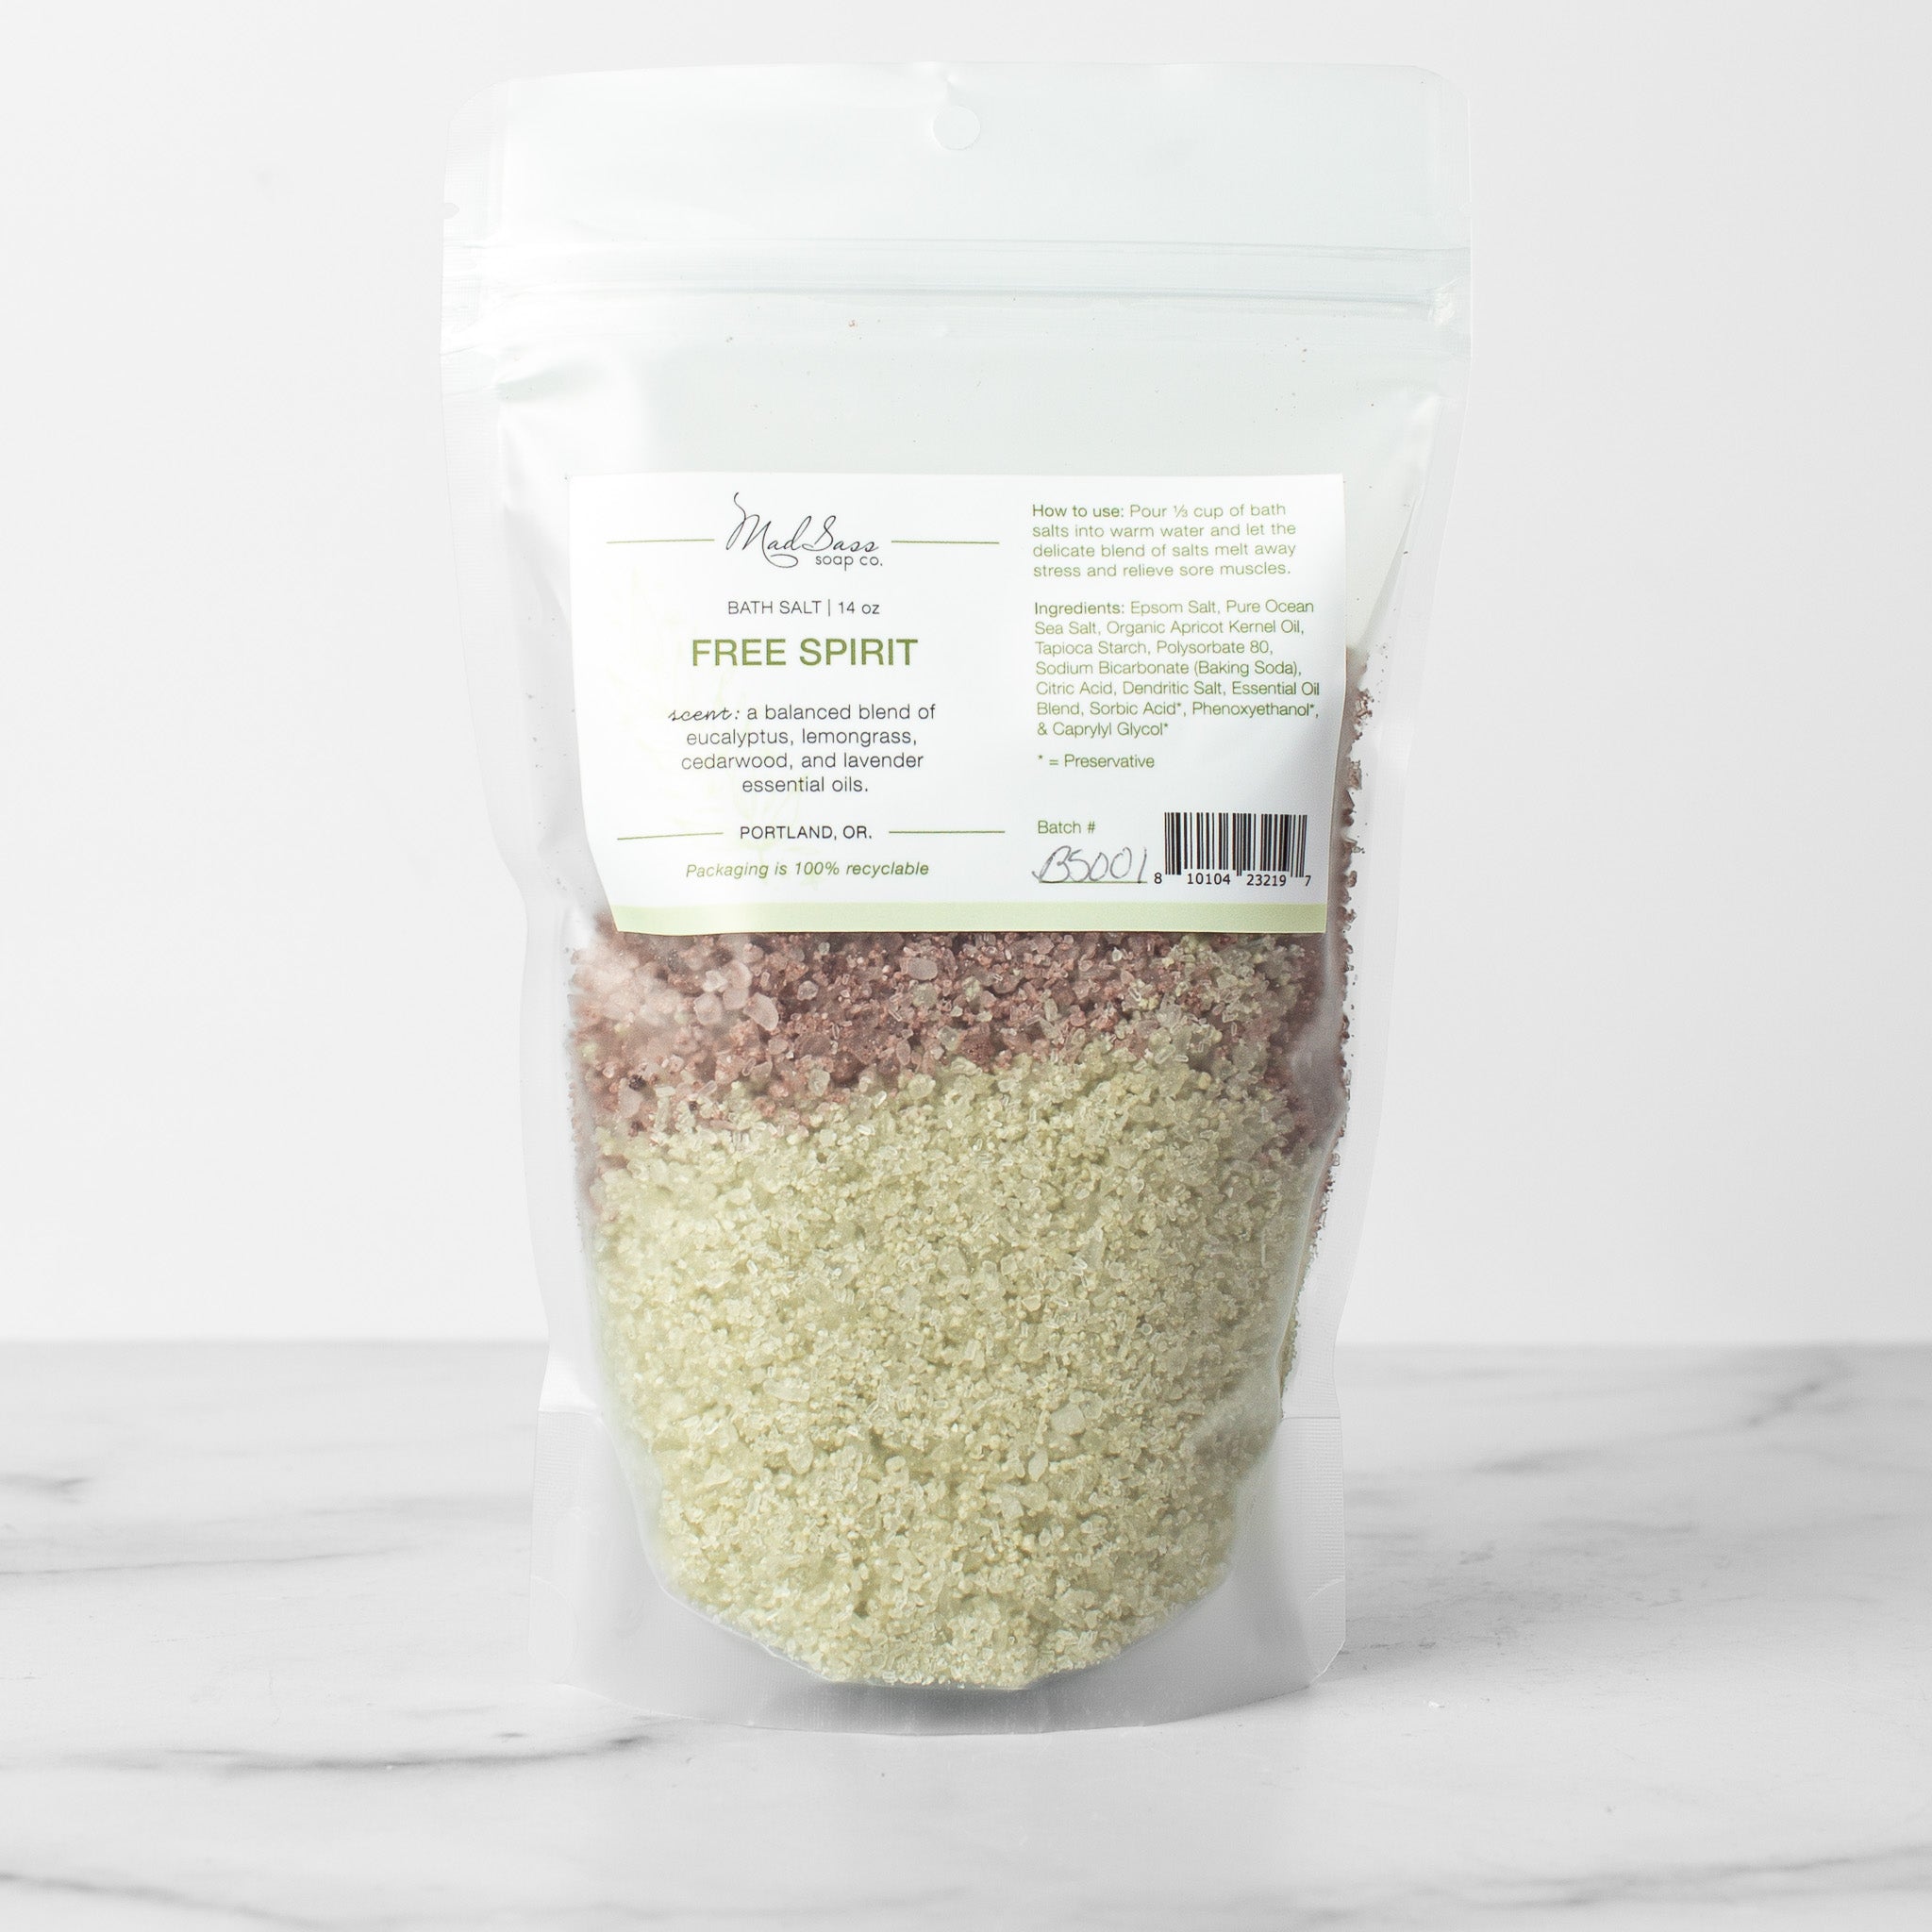 One bag of Free Spirit bath salts on a white background. Free Spirit is a two toned layered bath salt in green and purple.